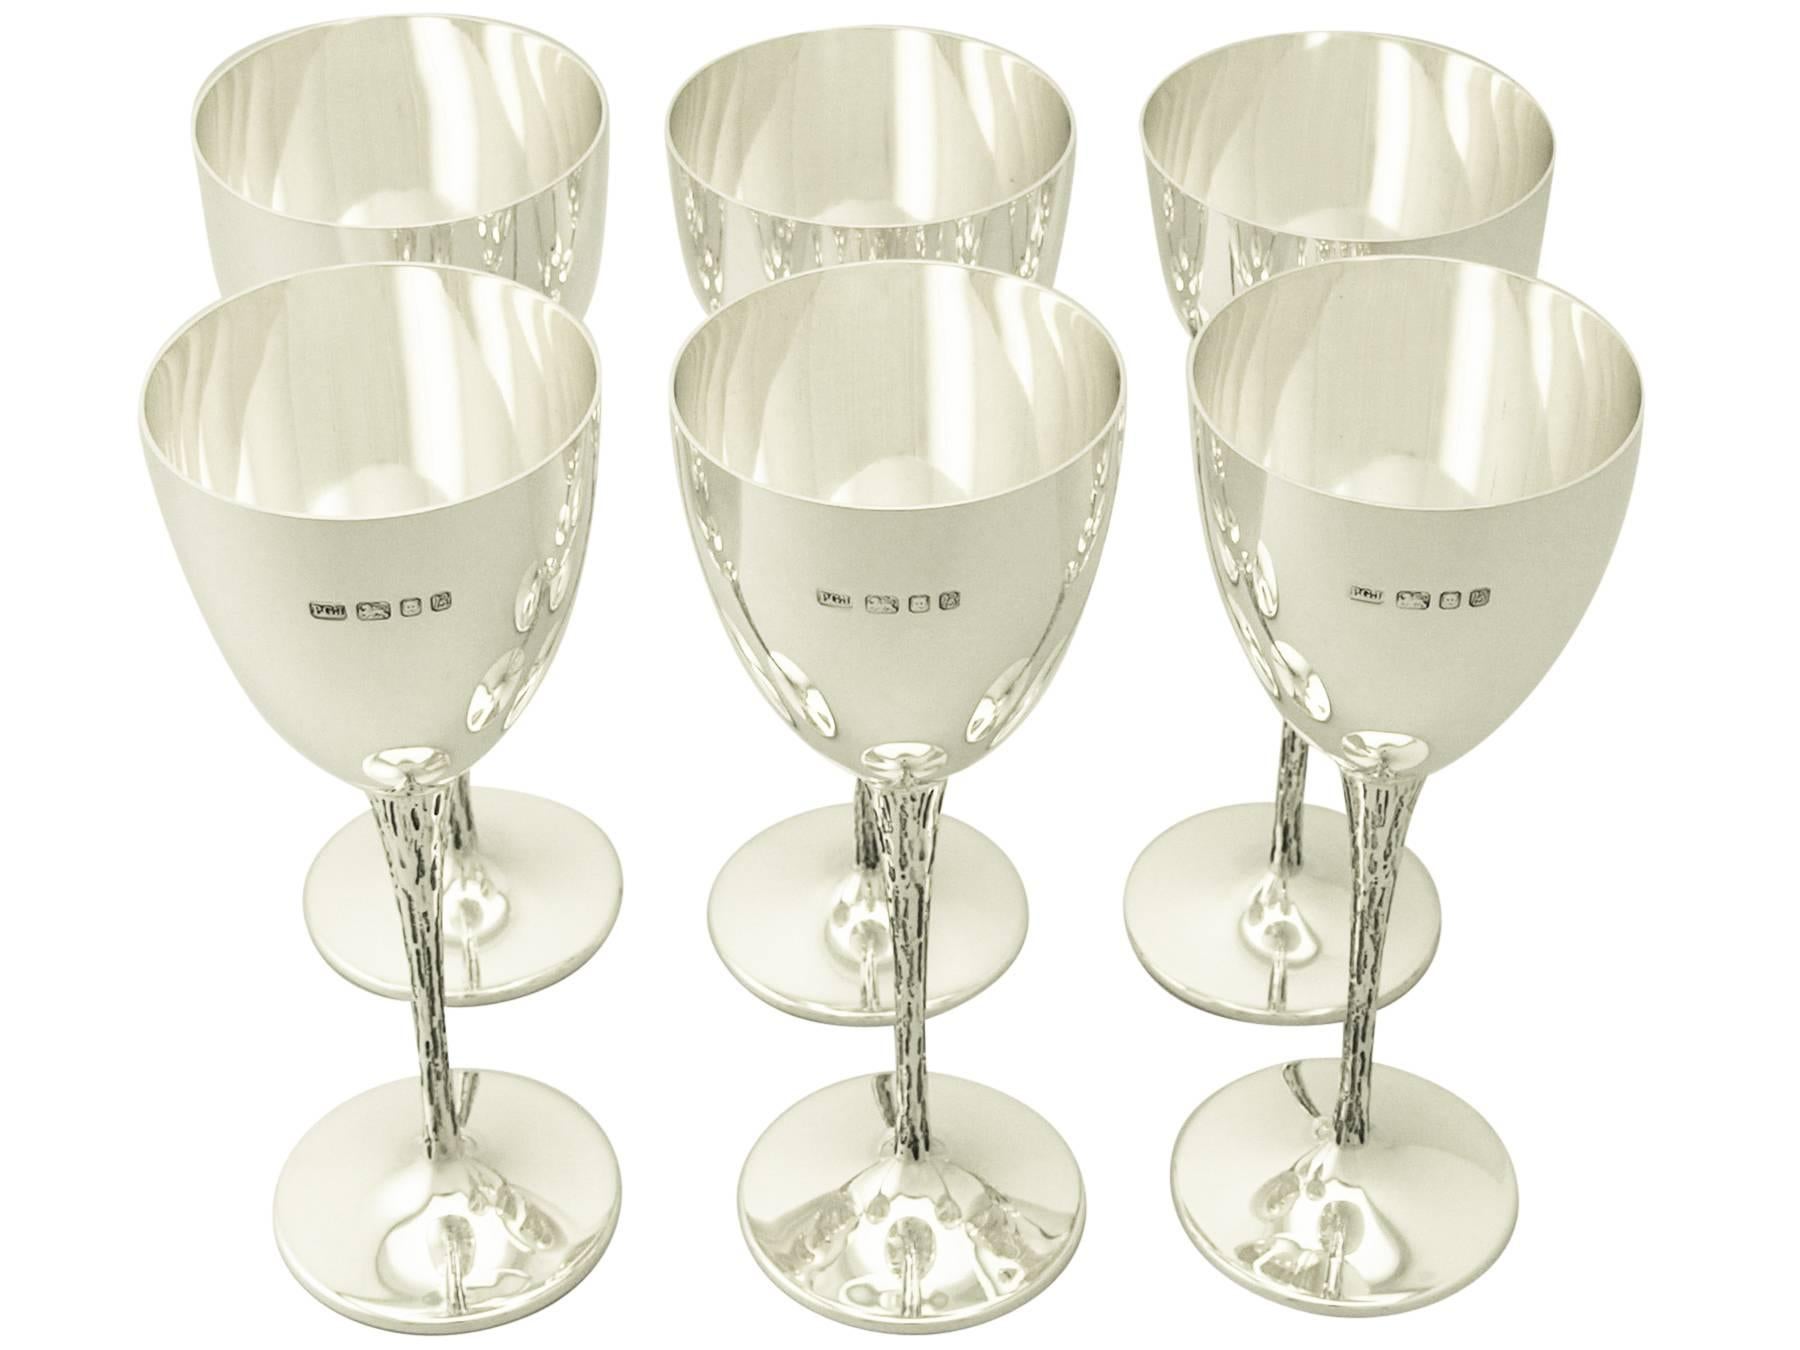 A fine and impressive set of six vintage Elizabeth II English sterling silver goblets; an addition to our range of wine and drinks related silverware These Fine vintage Elizabeth II sterling silver goblets have a plain rounded bell shaped form onto